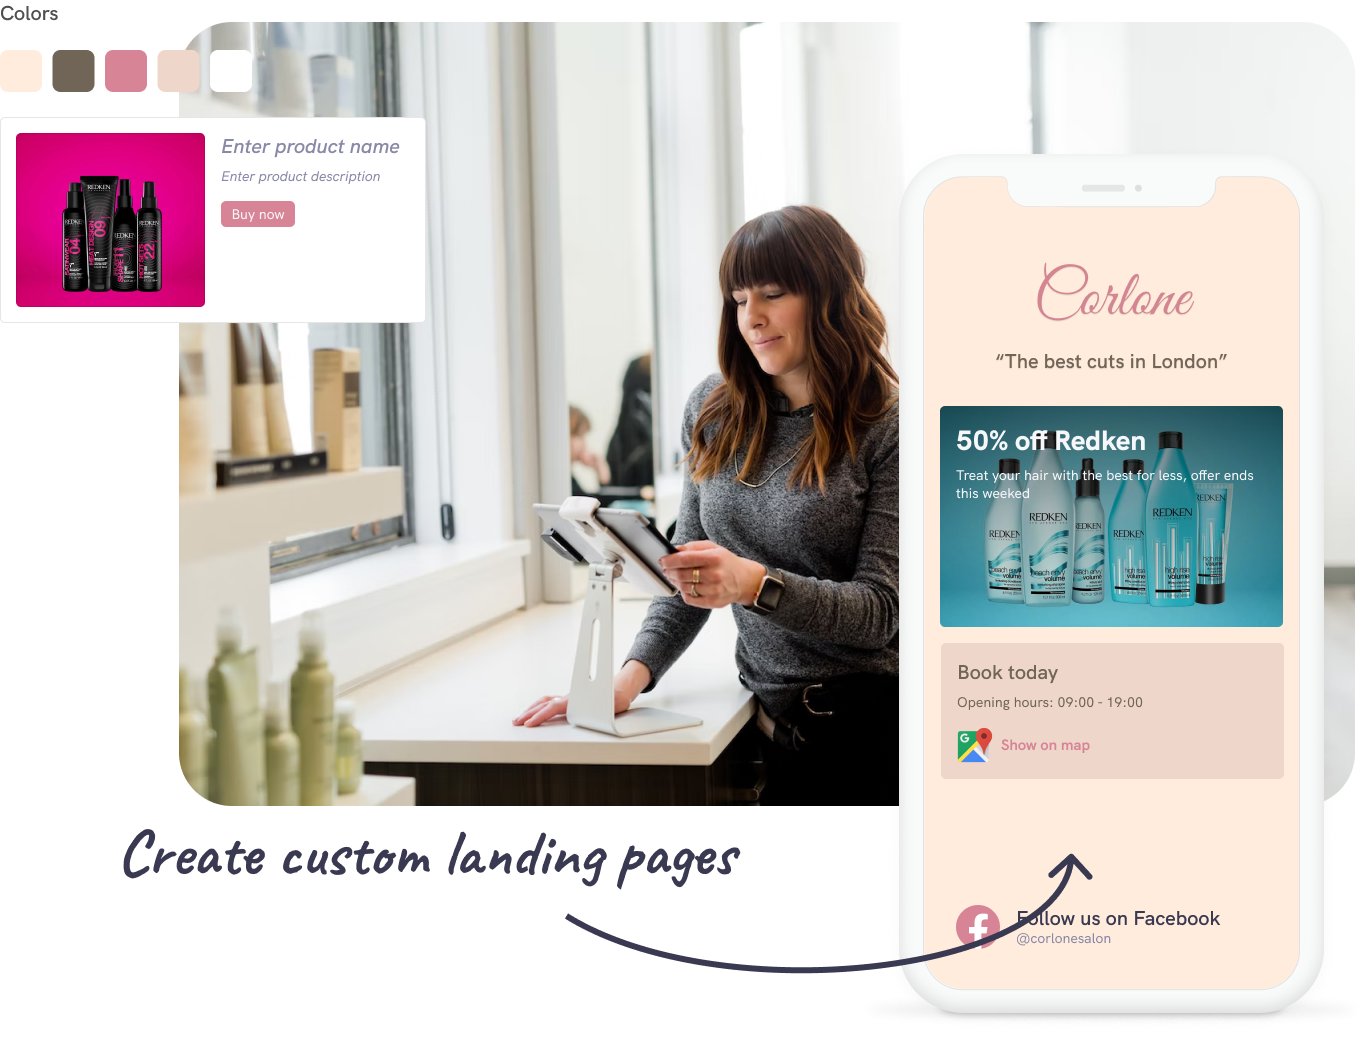 A photo and screenshot showing a woman in a salon creating a custom landing page for a marketing campaign